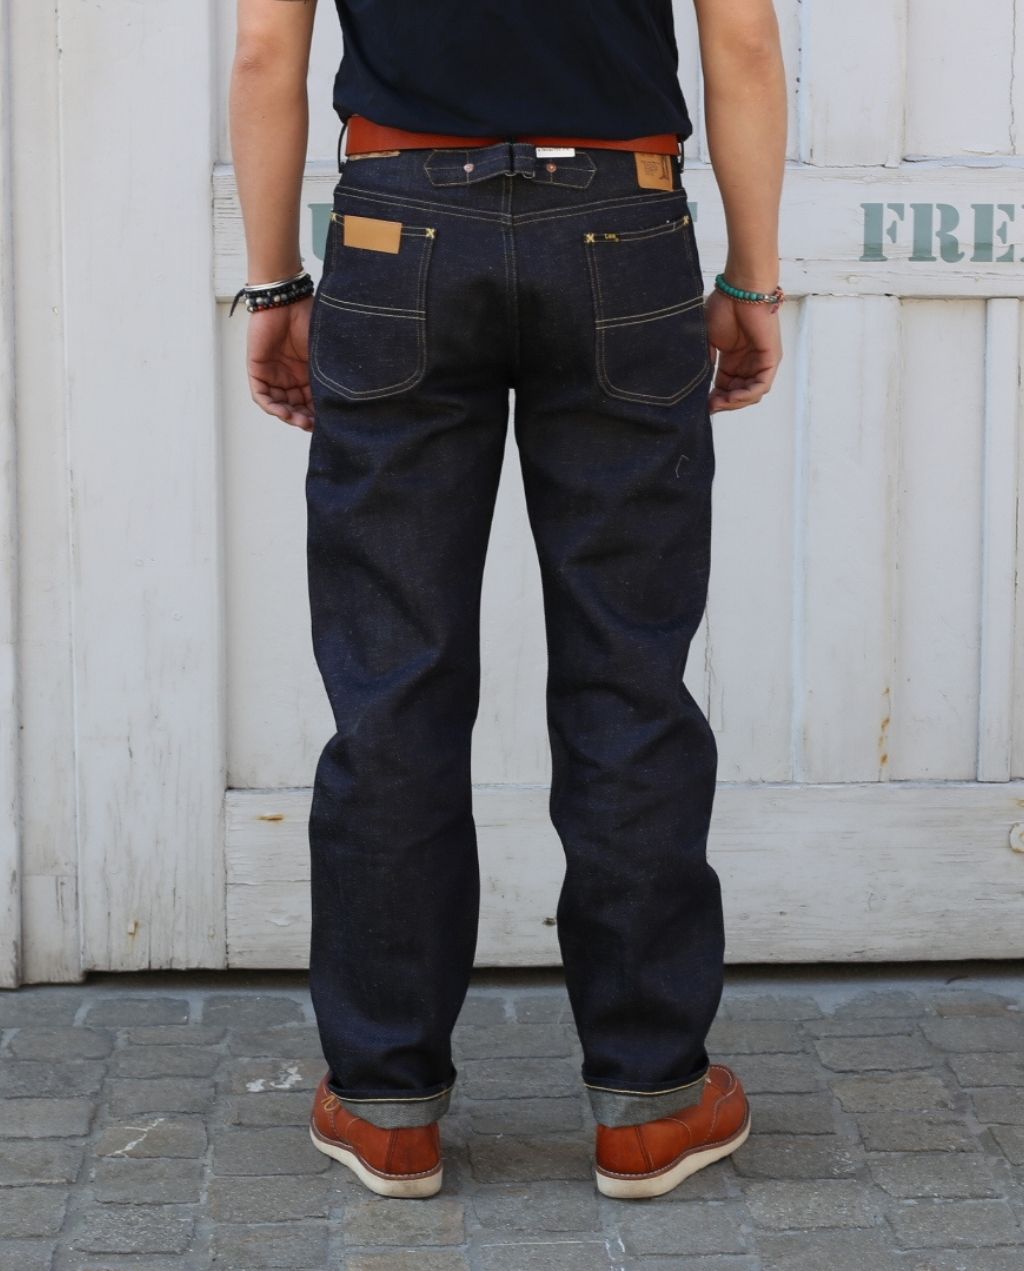 101 131 COWBOY JEANS IN DRY